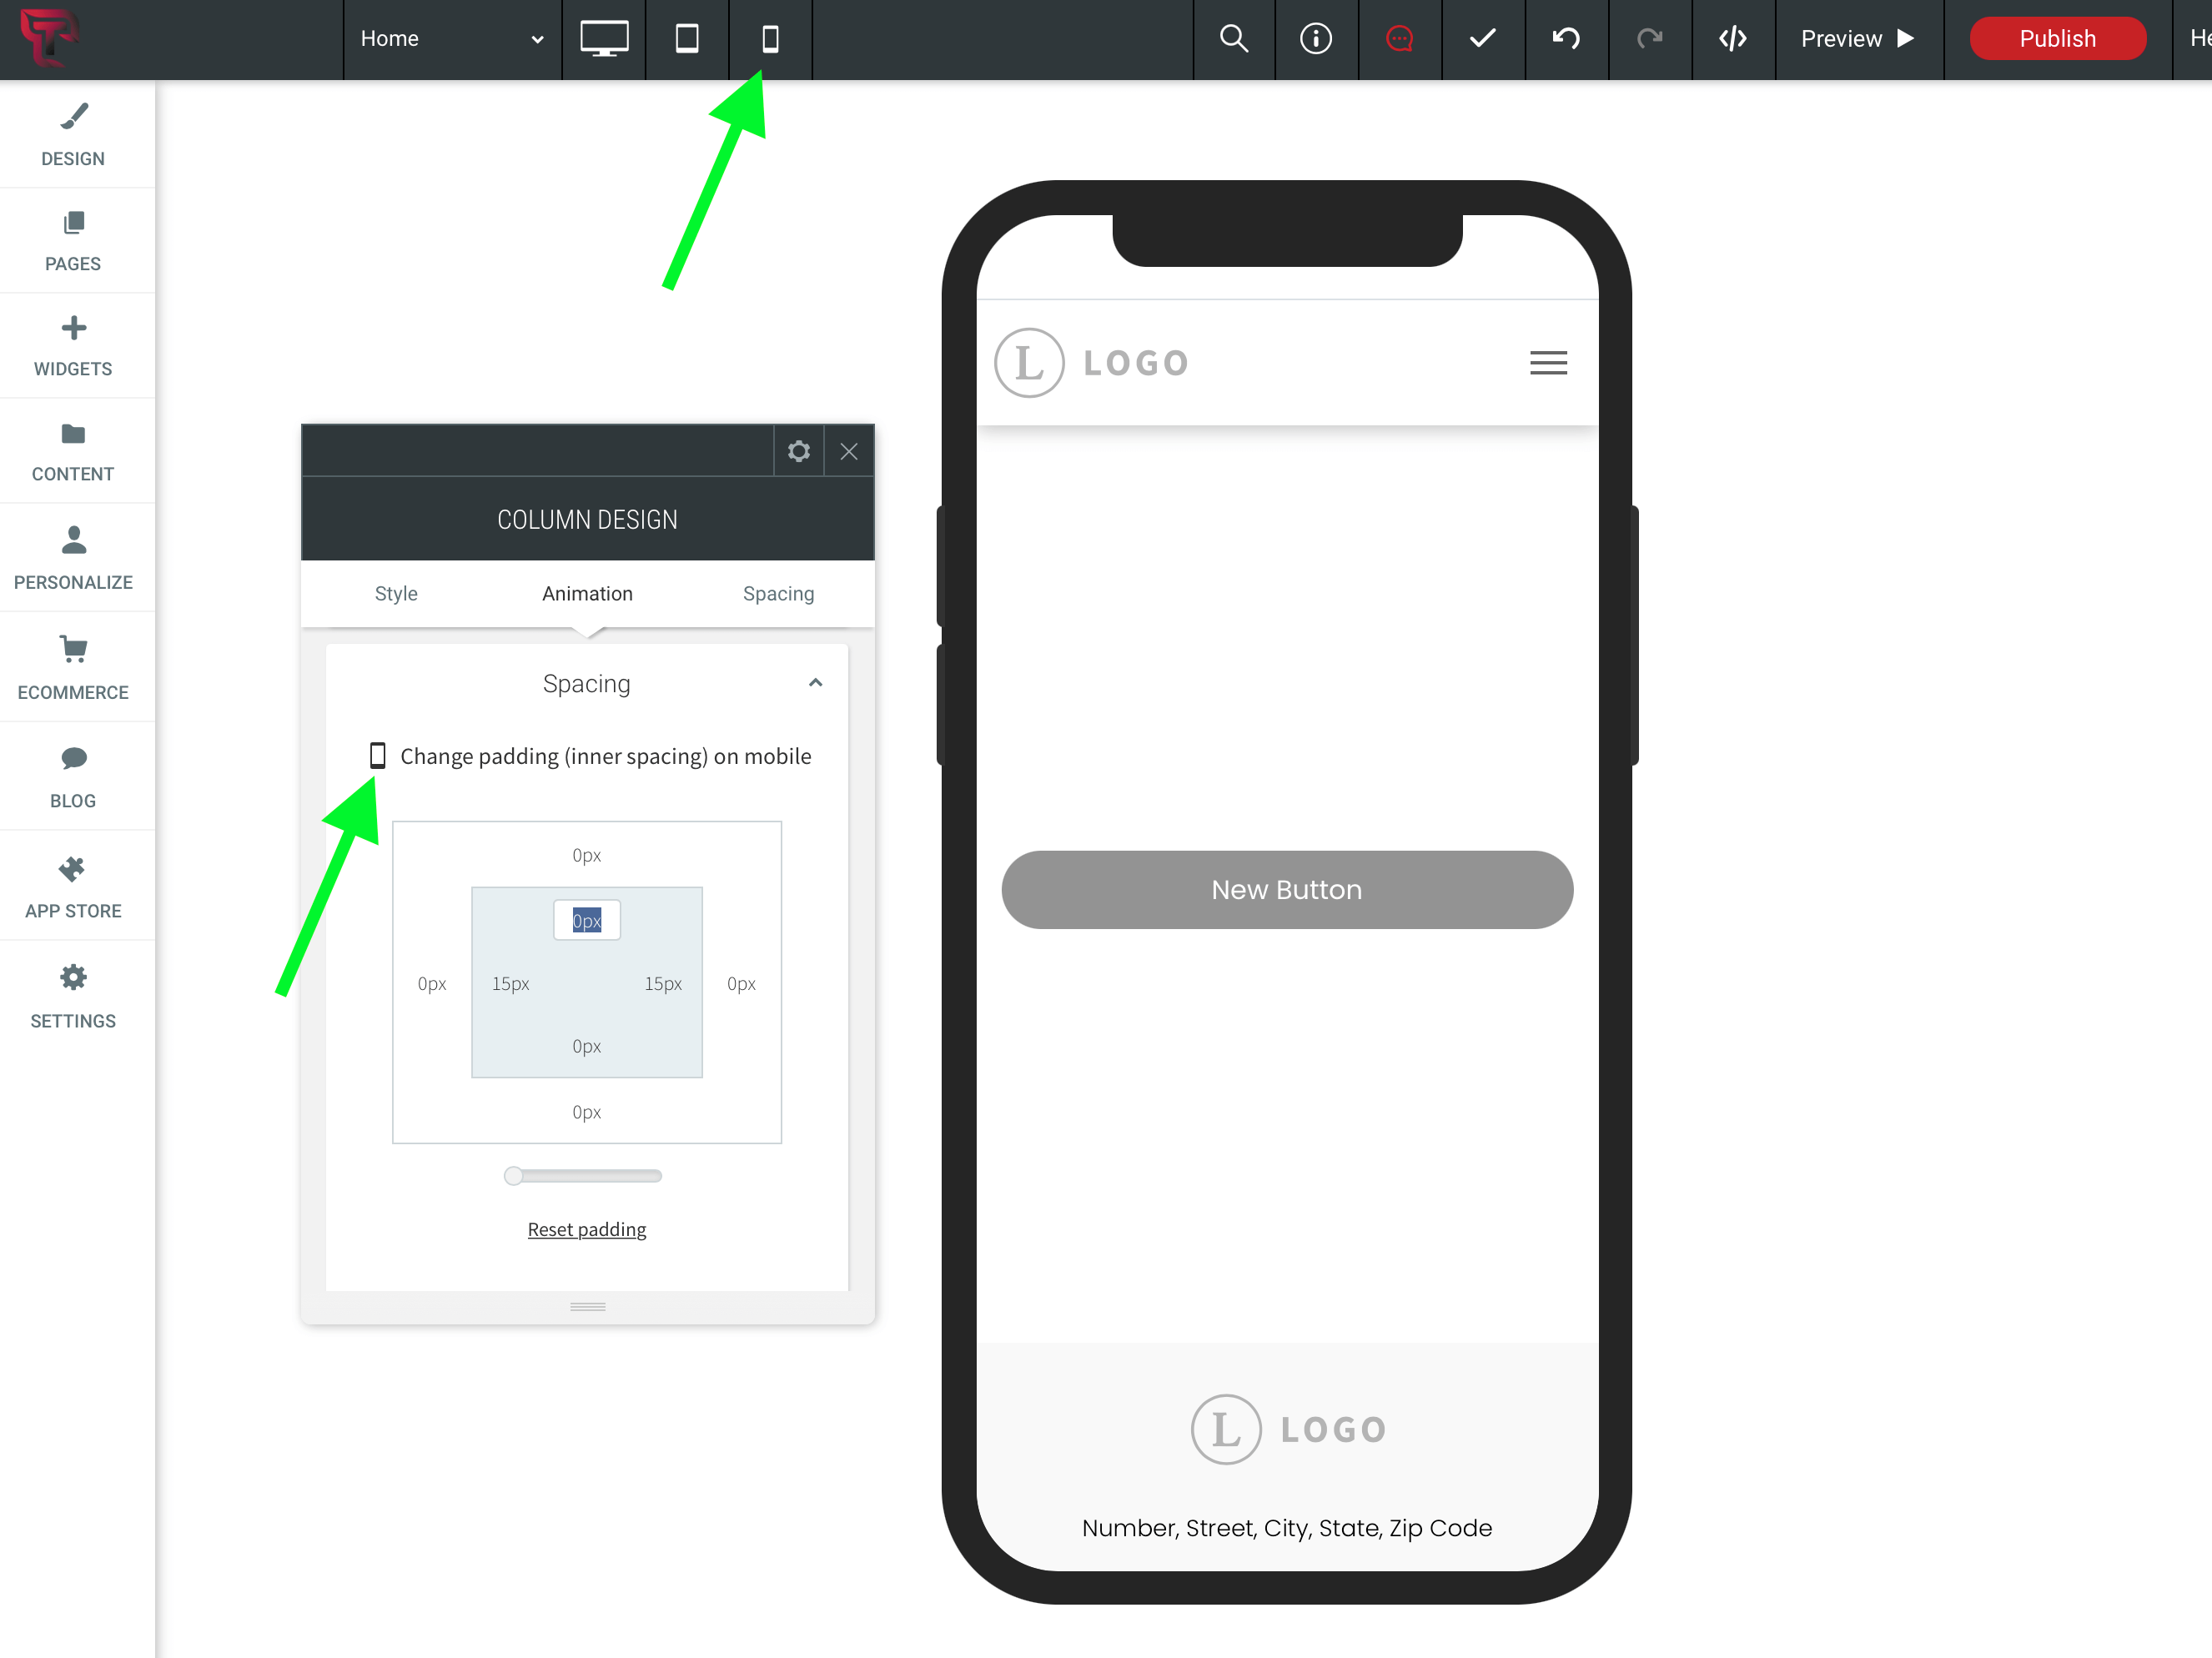 Mobile icon showing you're editing mobile styles